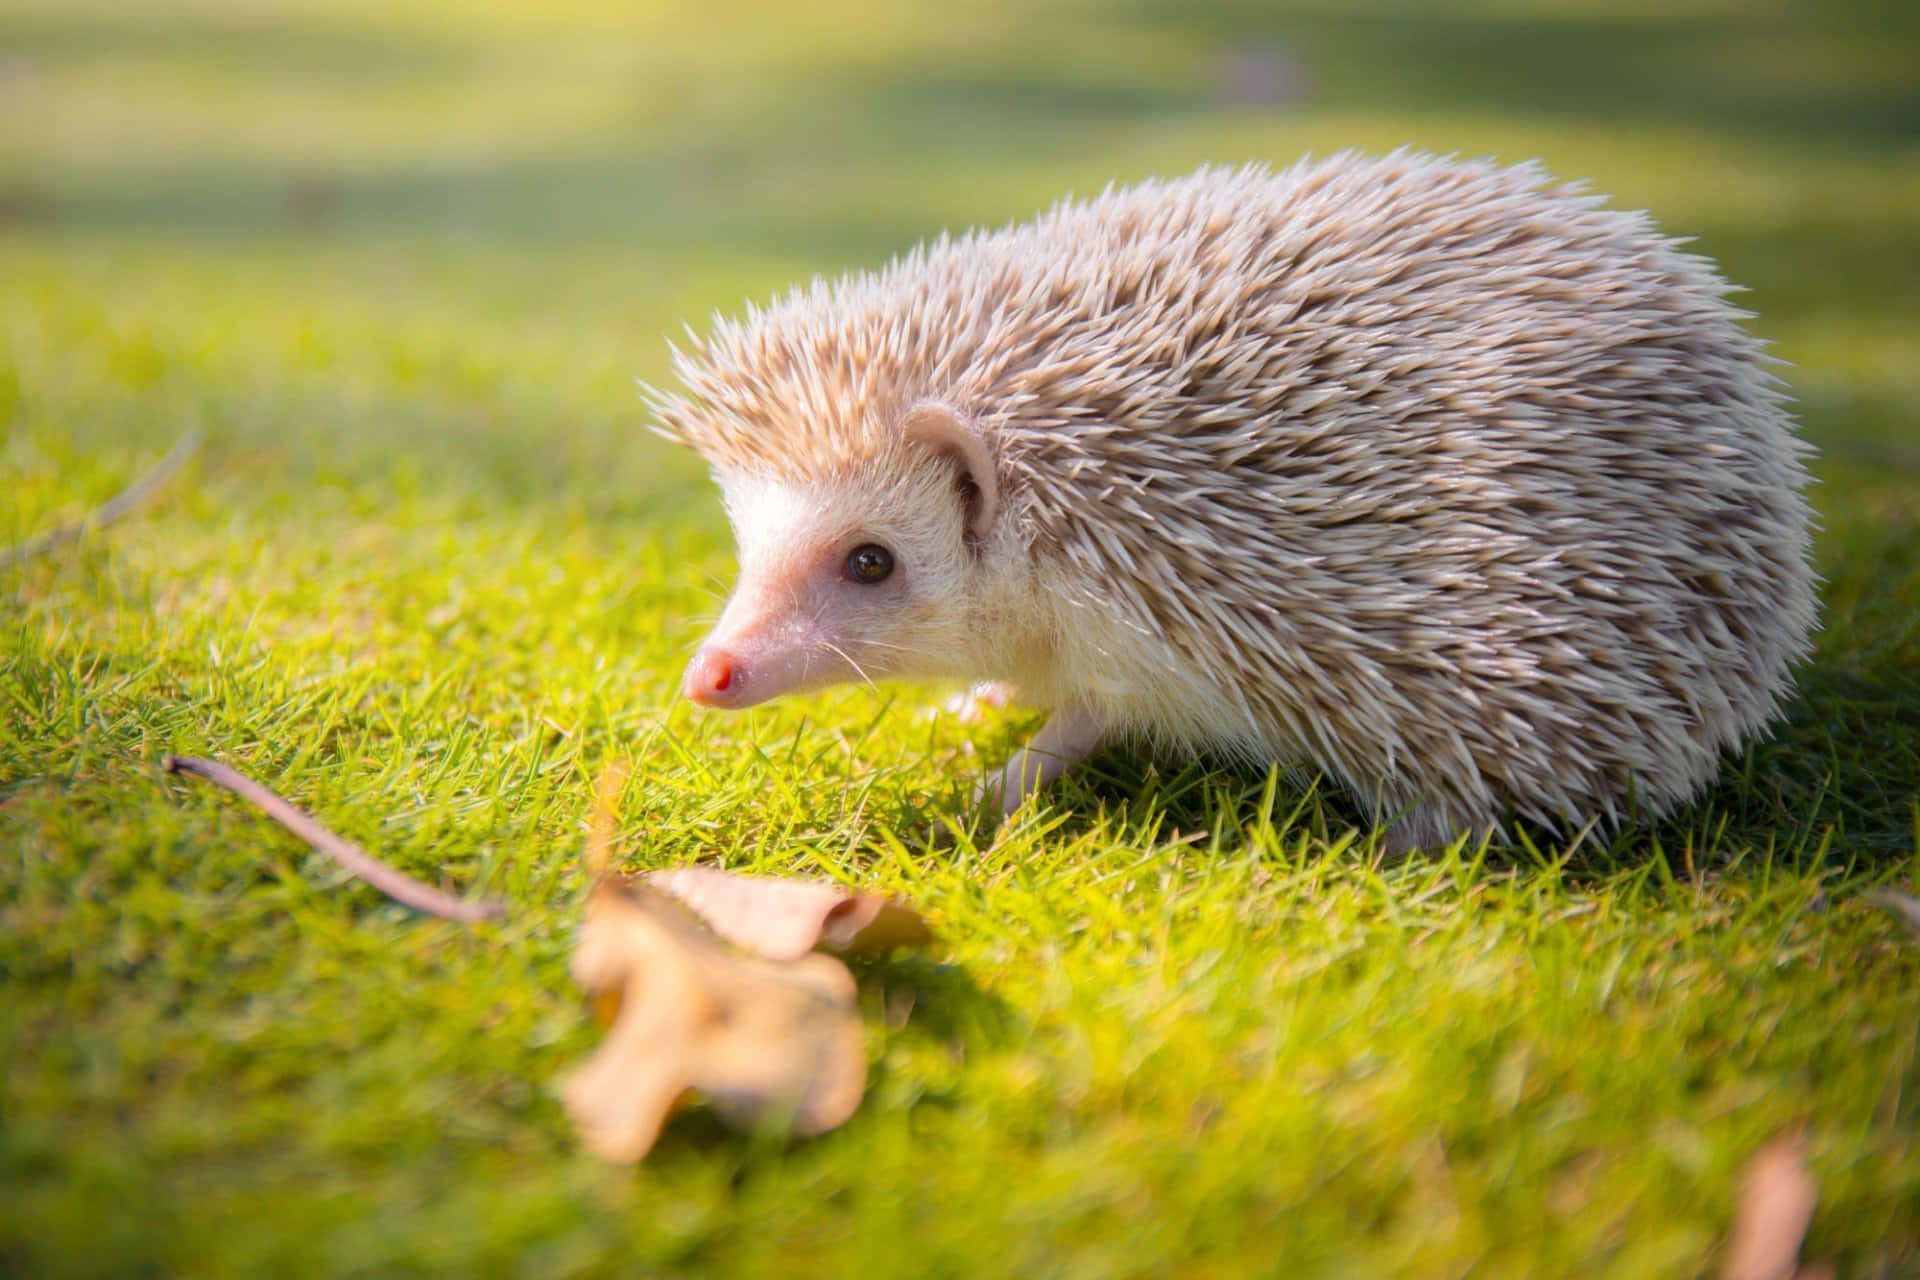 Cute Hedgehog Spring Grass Lawn Picture